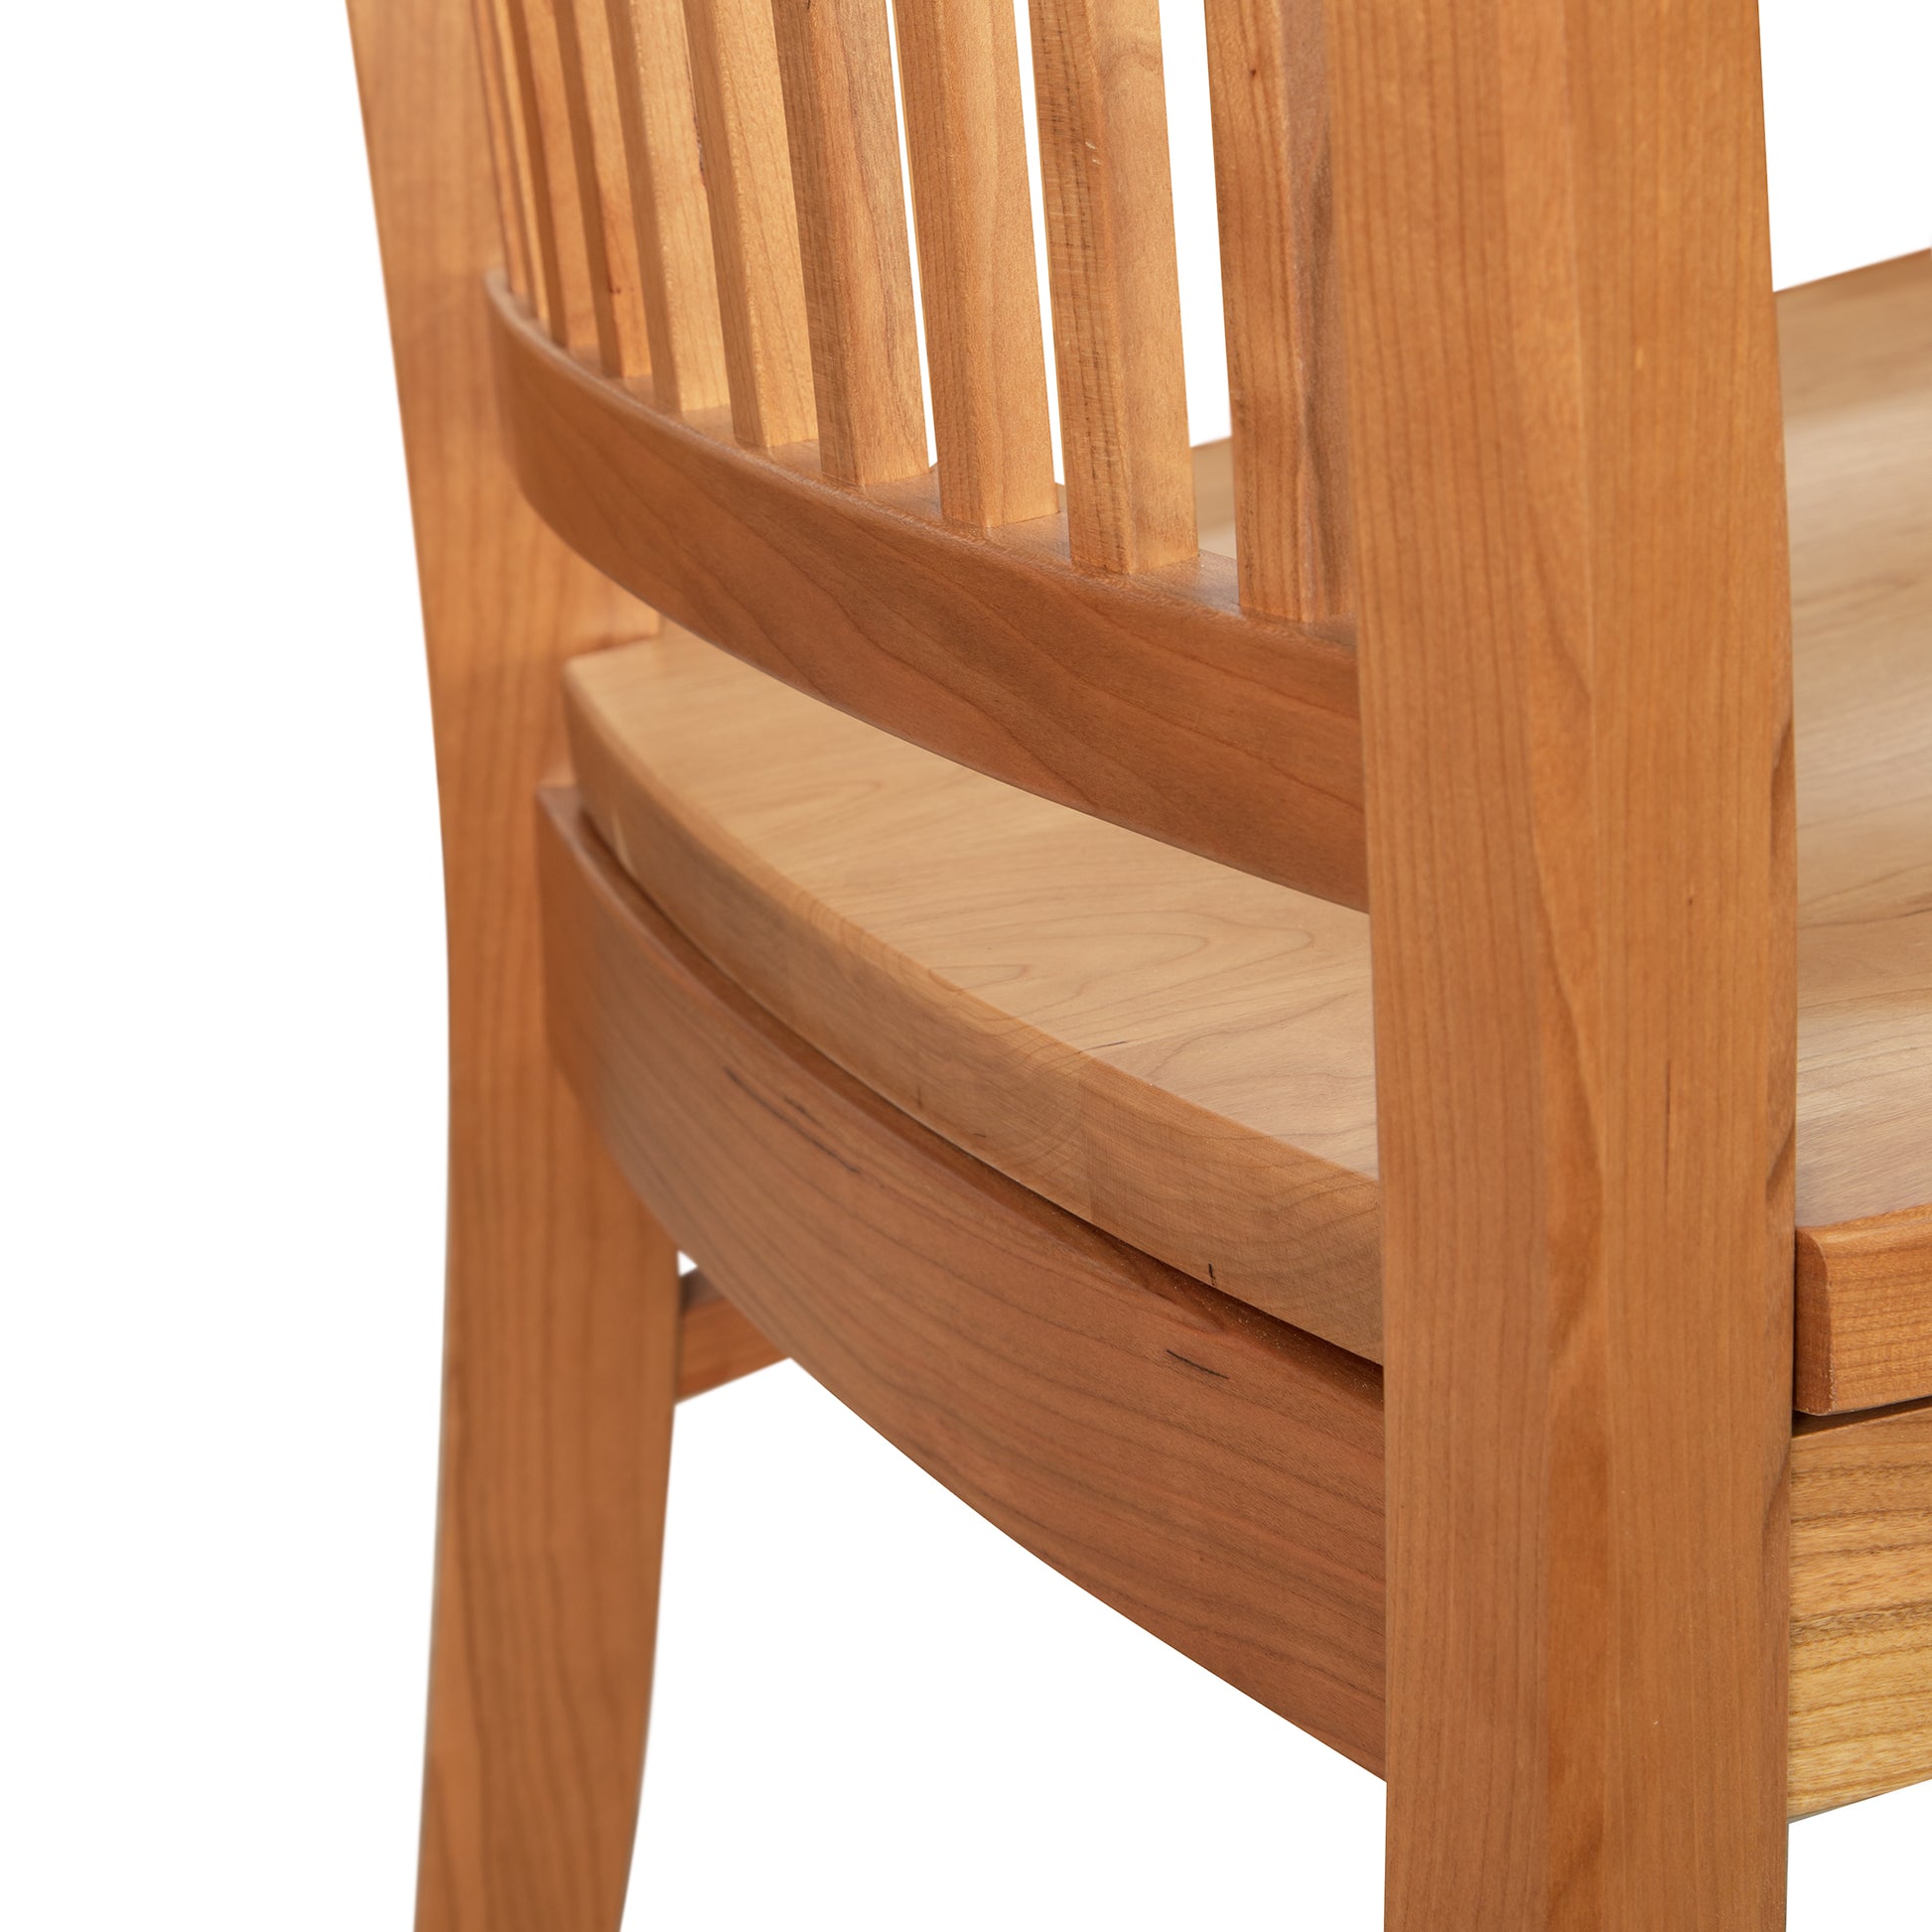 Close-up of a Vermont Woods Studios Contemporary Shaker Chair with Wood Seat showing detailed craftsmanship, focusing on the vertical slats and curved backrest with a smooth, polished finish.